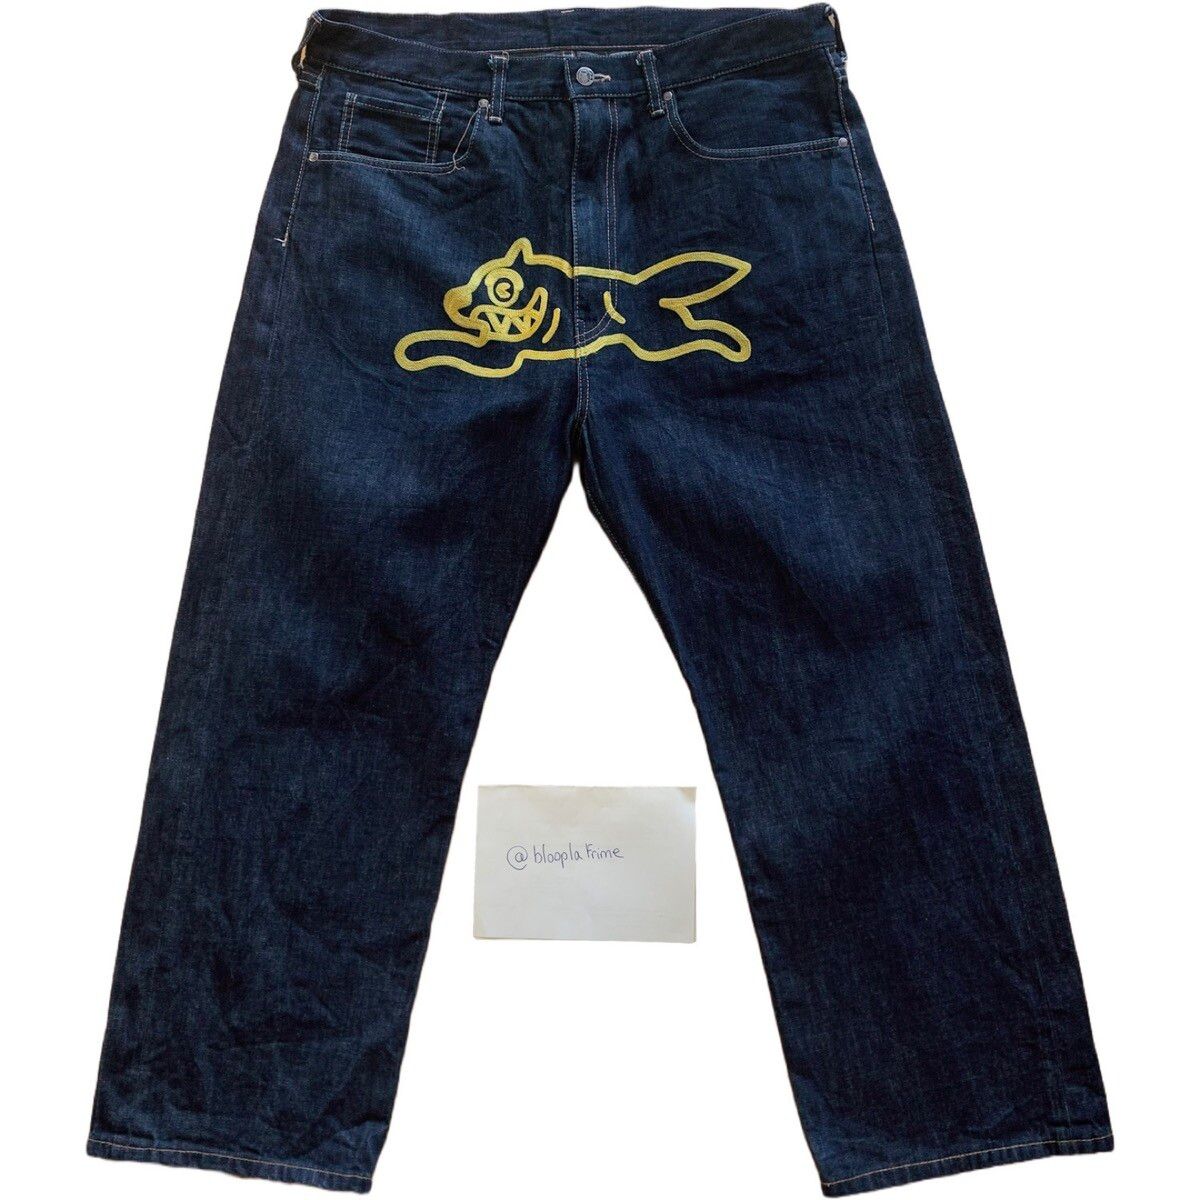 Billionaire Boys Club Running dog jeans embroded | Grailed